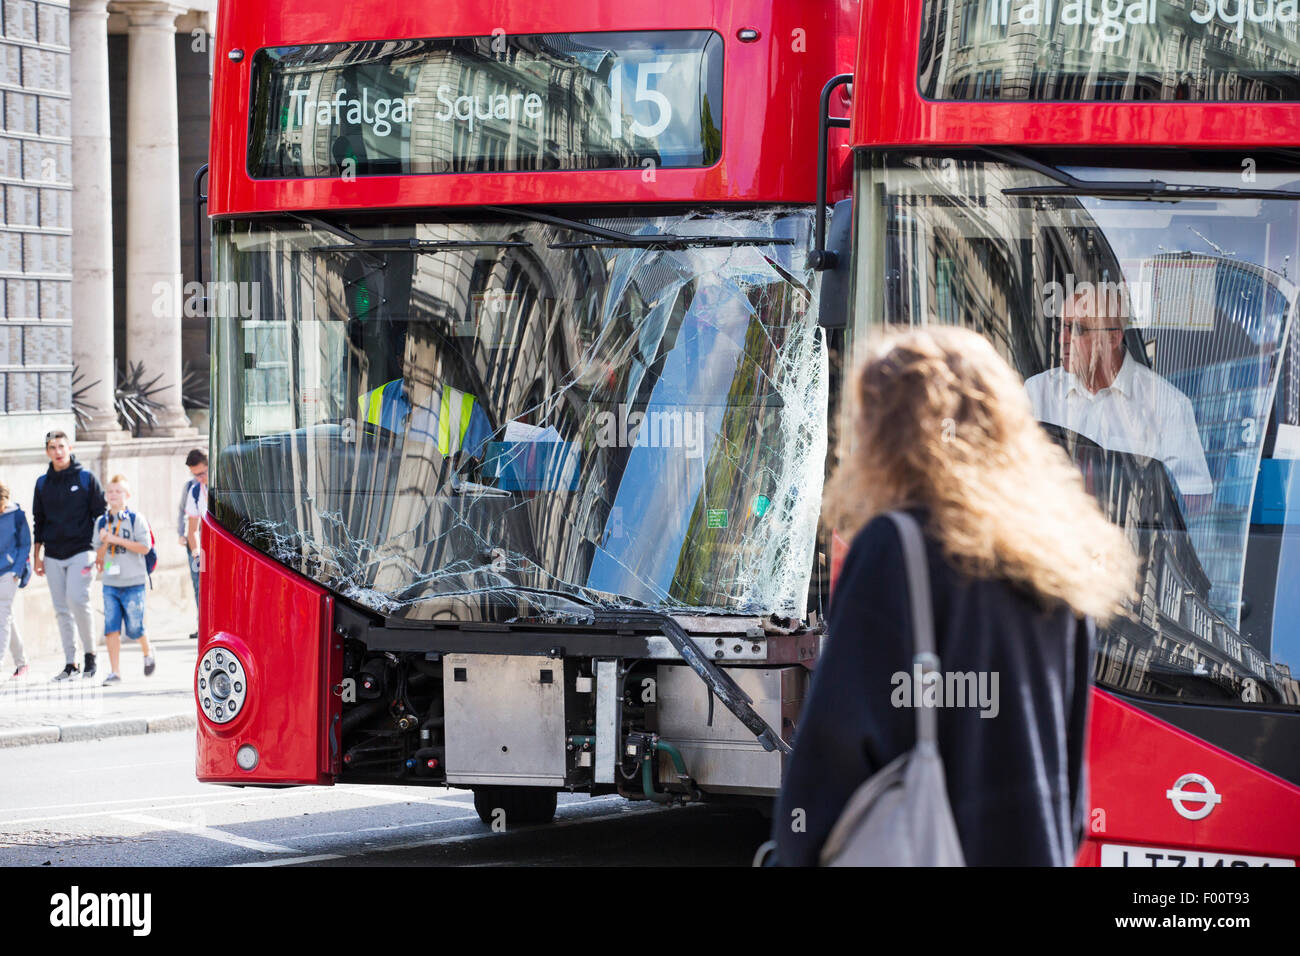 A London bus with a smashed windscreen after it ran into the back of another vehicle, London, UK. Stock Photo